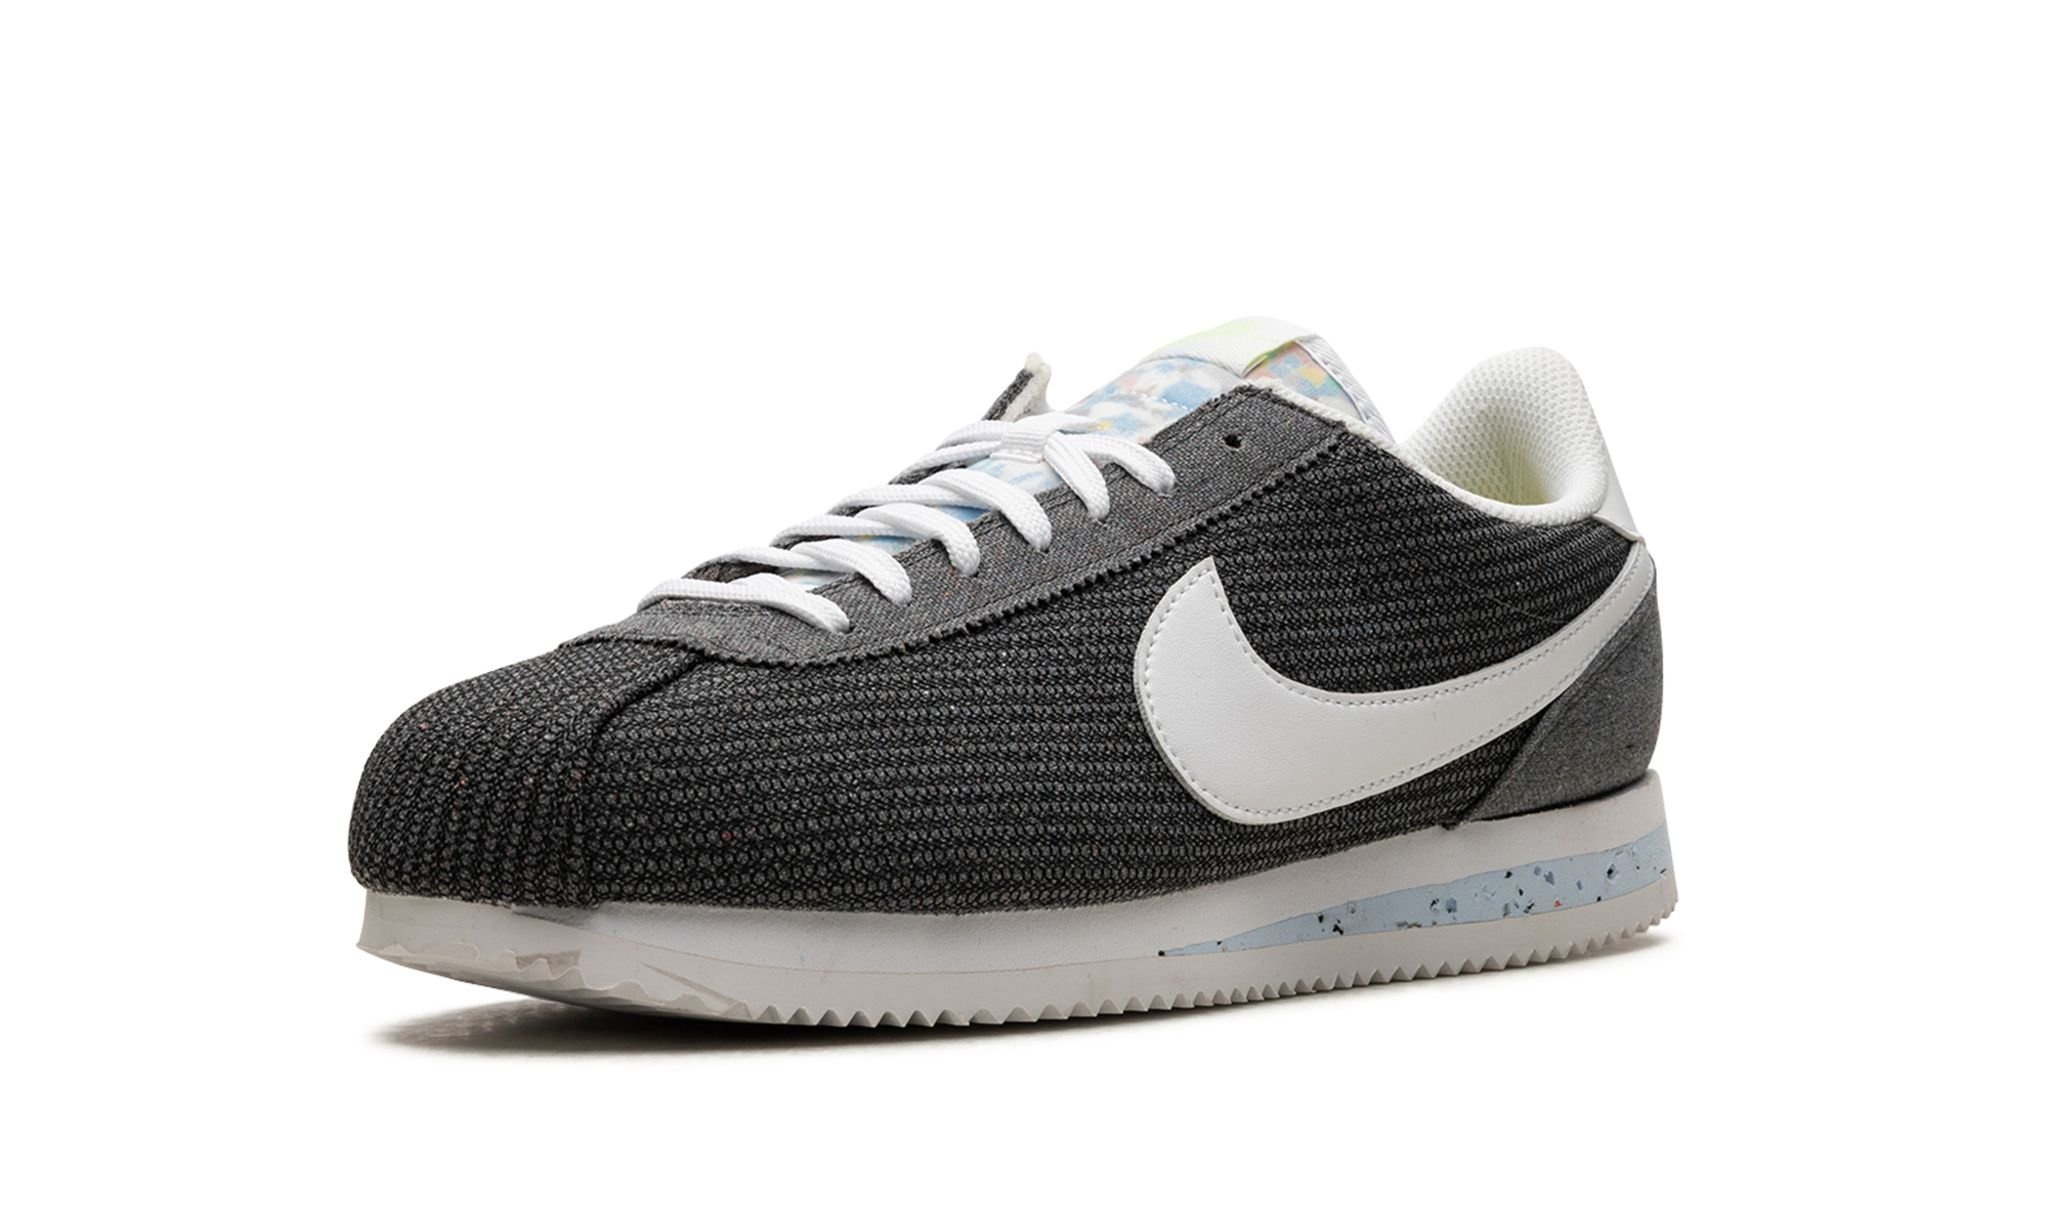 Classic Cortez "Recycled Canvas" - 4